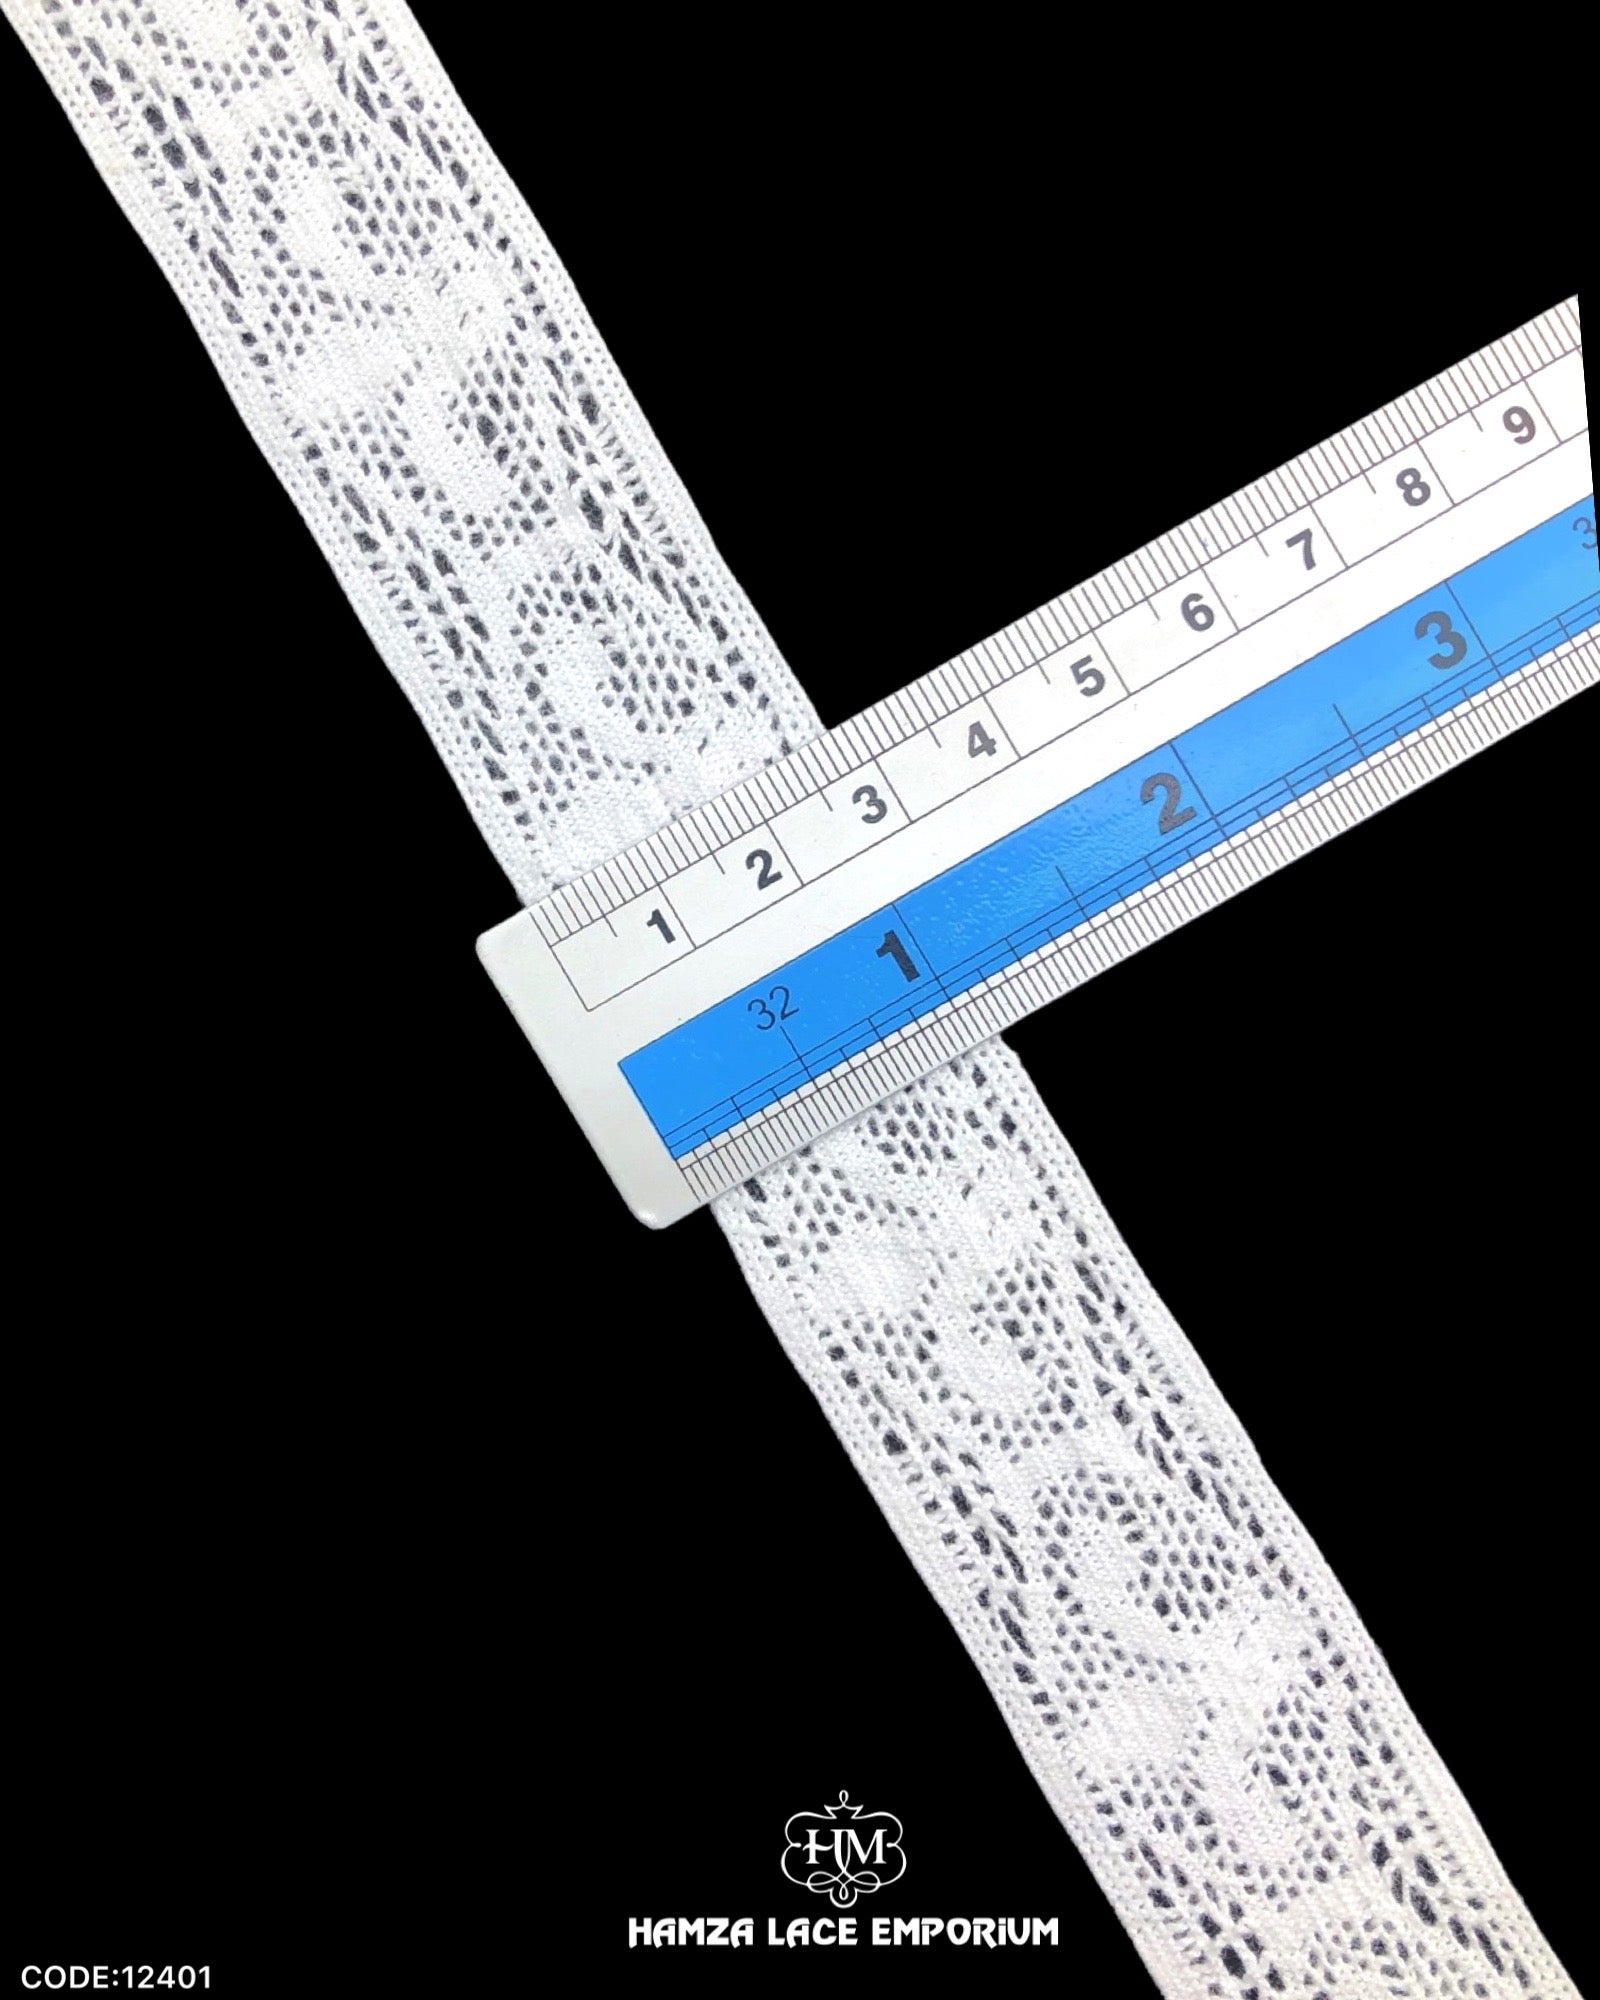 Size of the 'Center Filling Crochet Lace 12401' is given with the help of a ruler as '1' inch